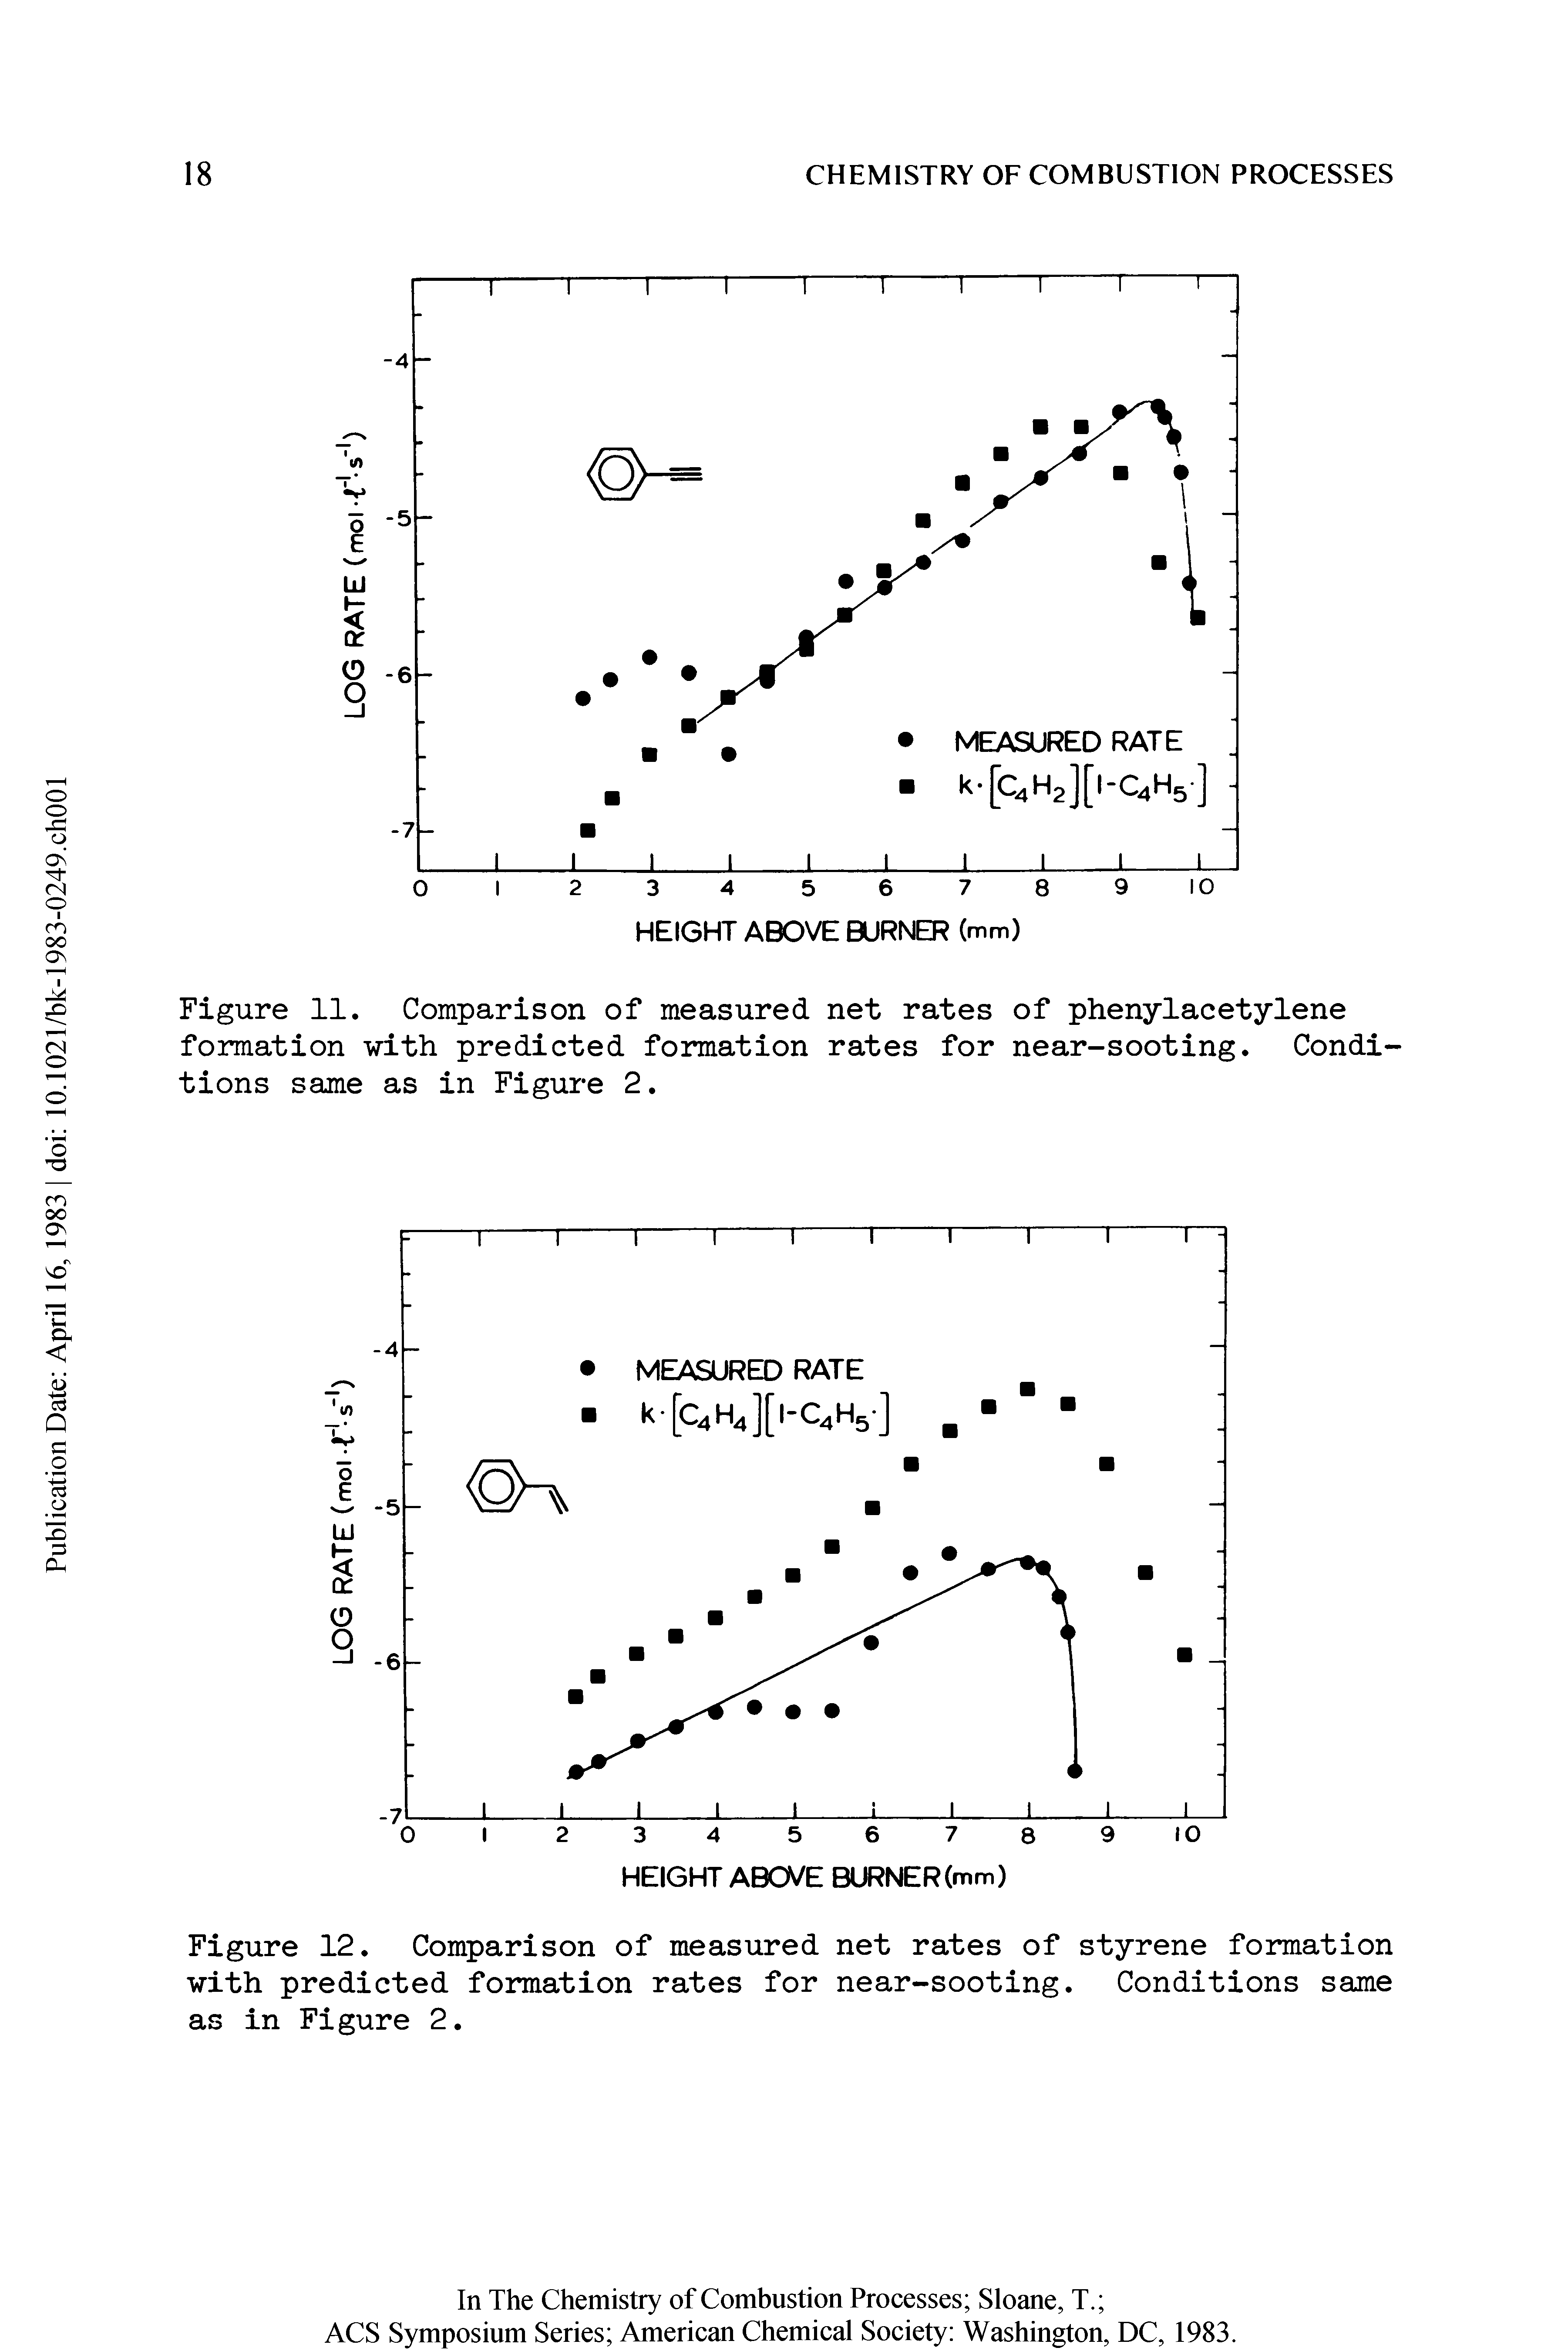 Figure 12. Comparison of measured net rates of styrene formation with predicted formation rates for near-sooting. Conditions same as in Figure 2.